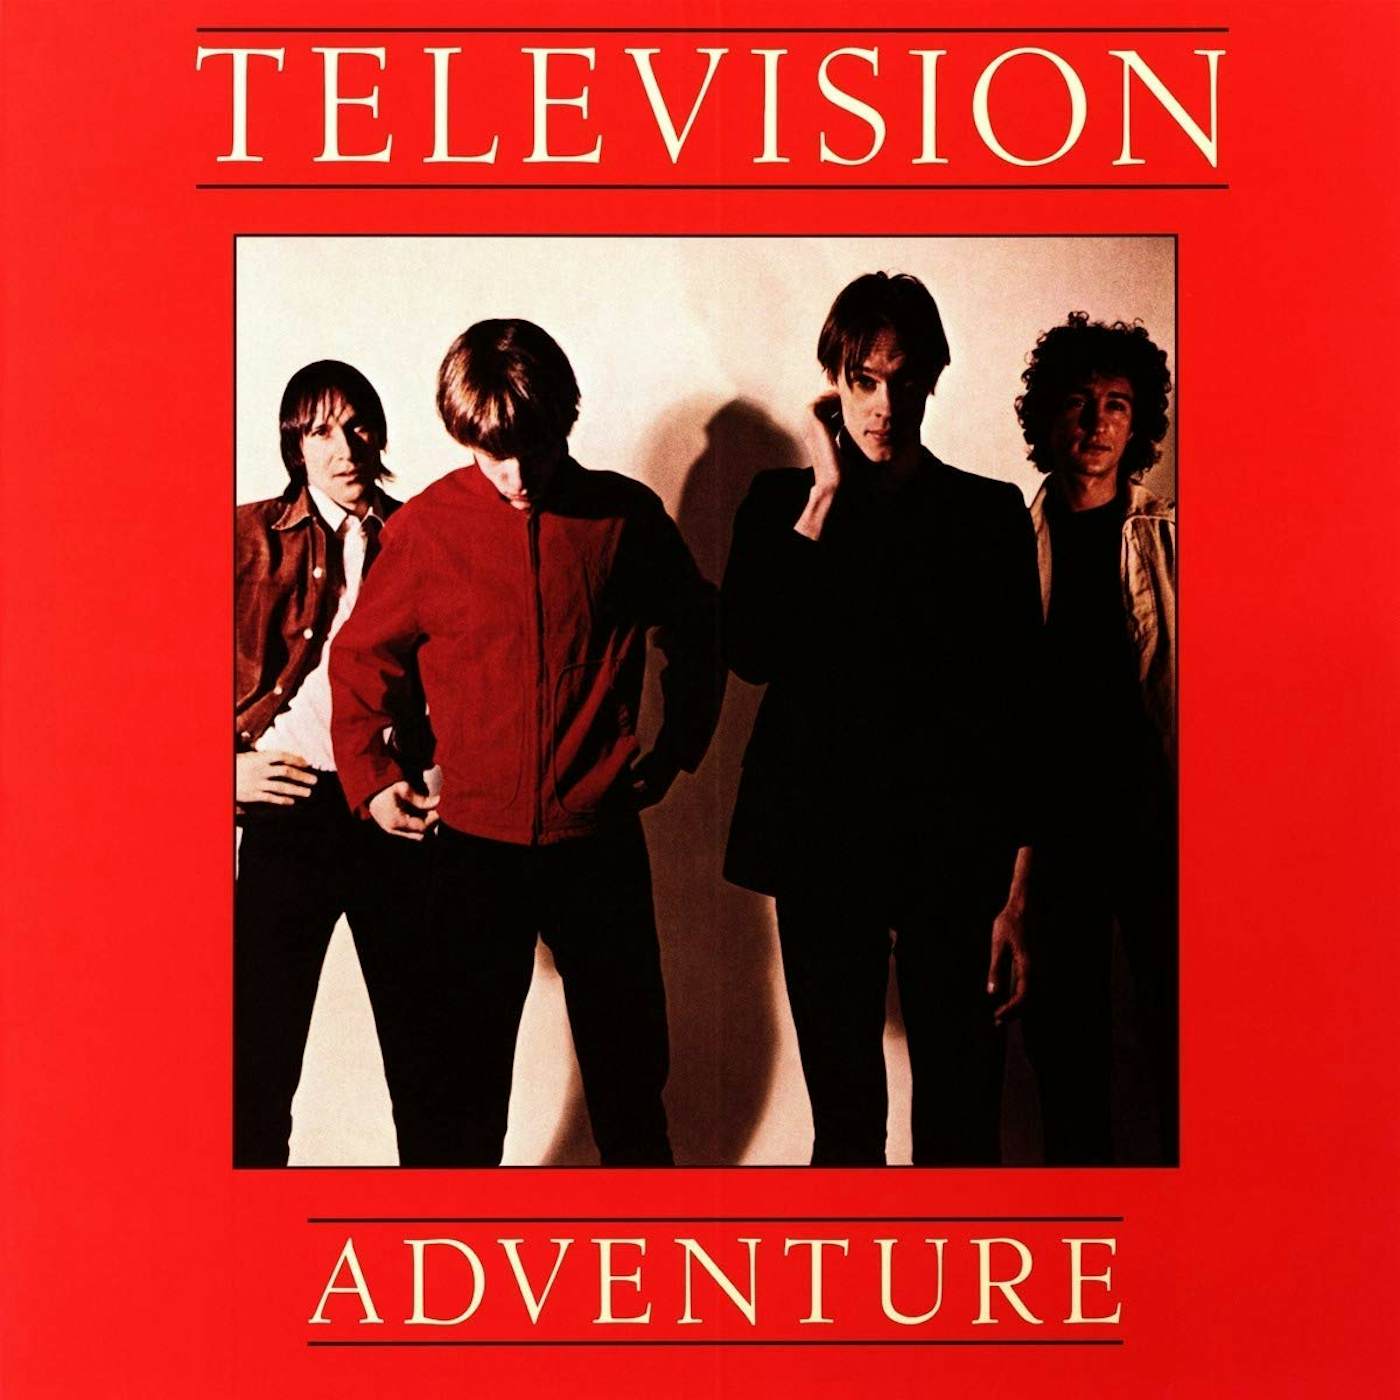  TELEVISION Marquee Moon LP RARE K52046 ELEKTRA RED